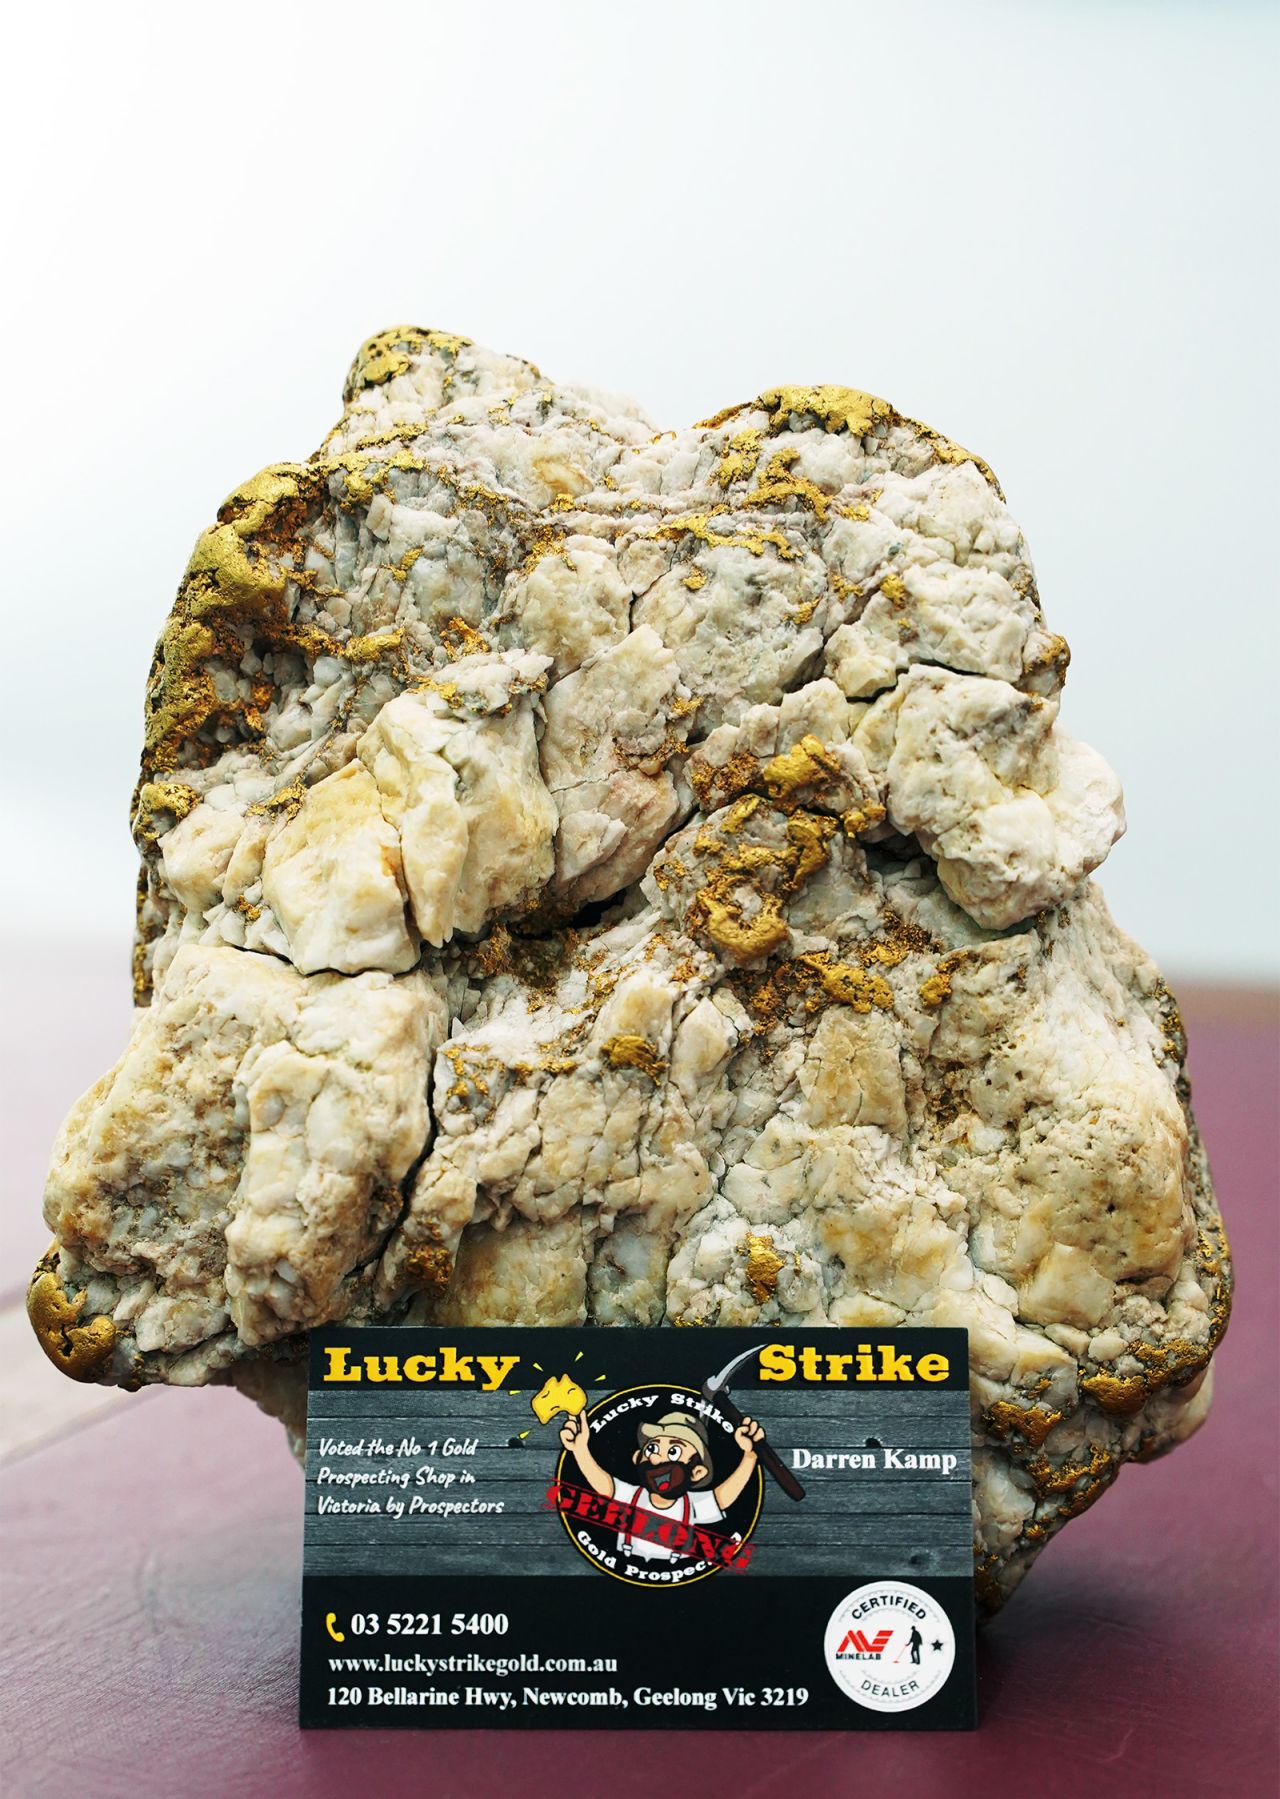 The gold-filled rock weighs 4.6 kilograms (10.1 pounds), with the precious metal making up 2.6 kilograms (5.7 pounds).